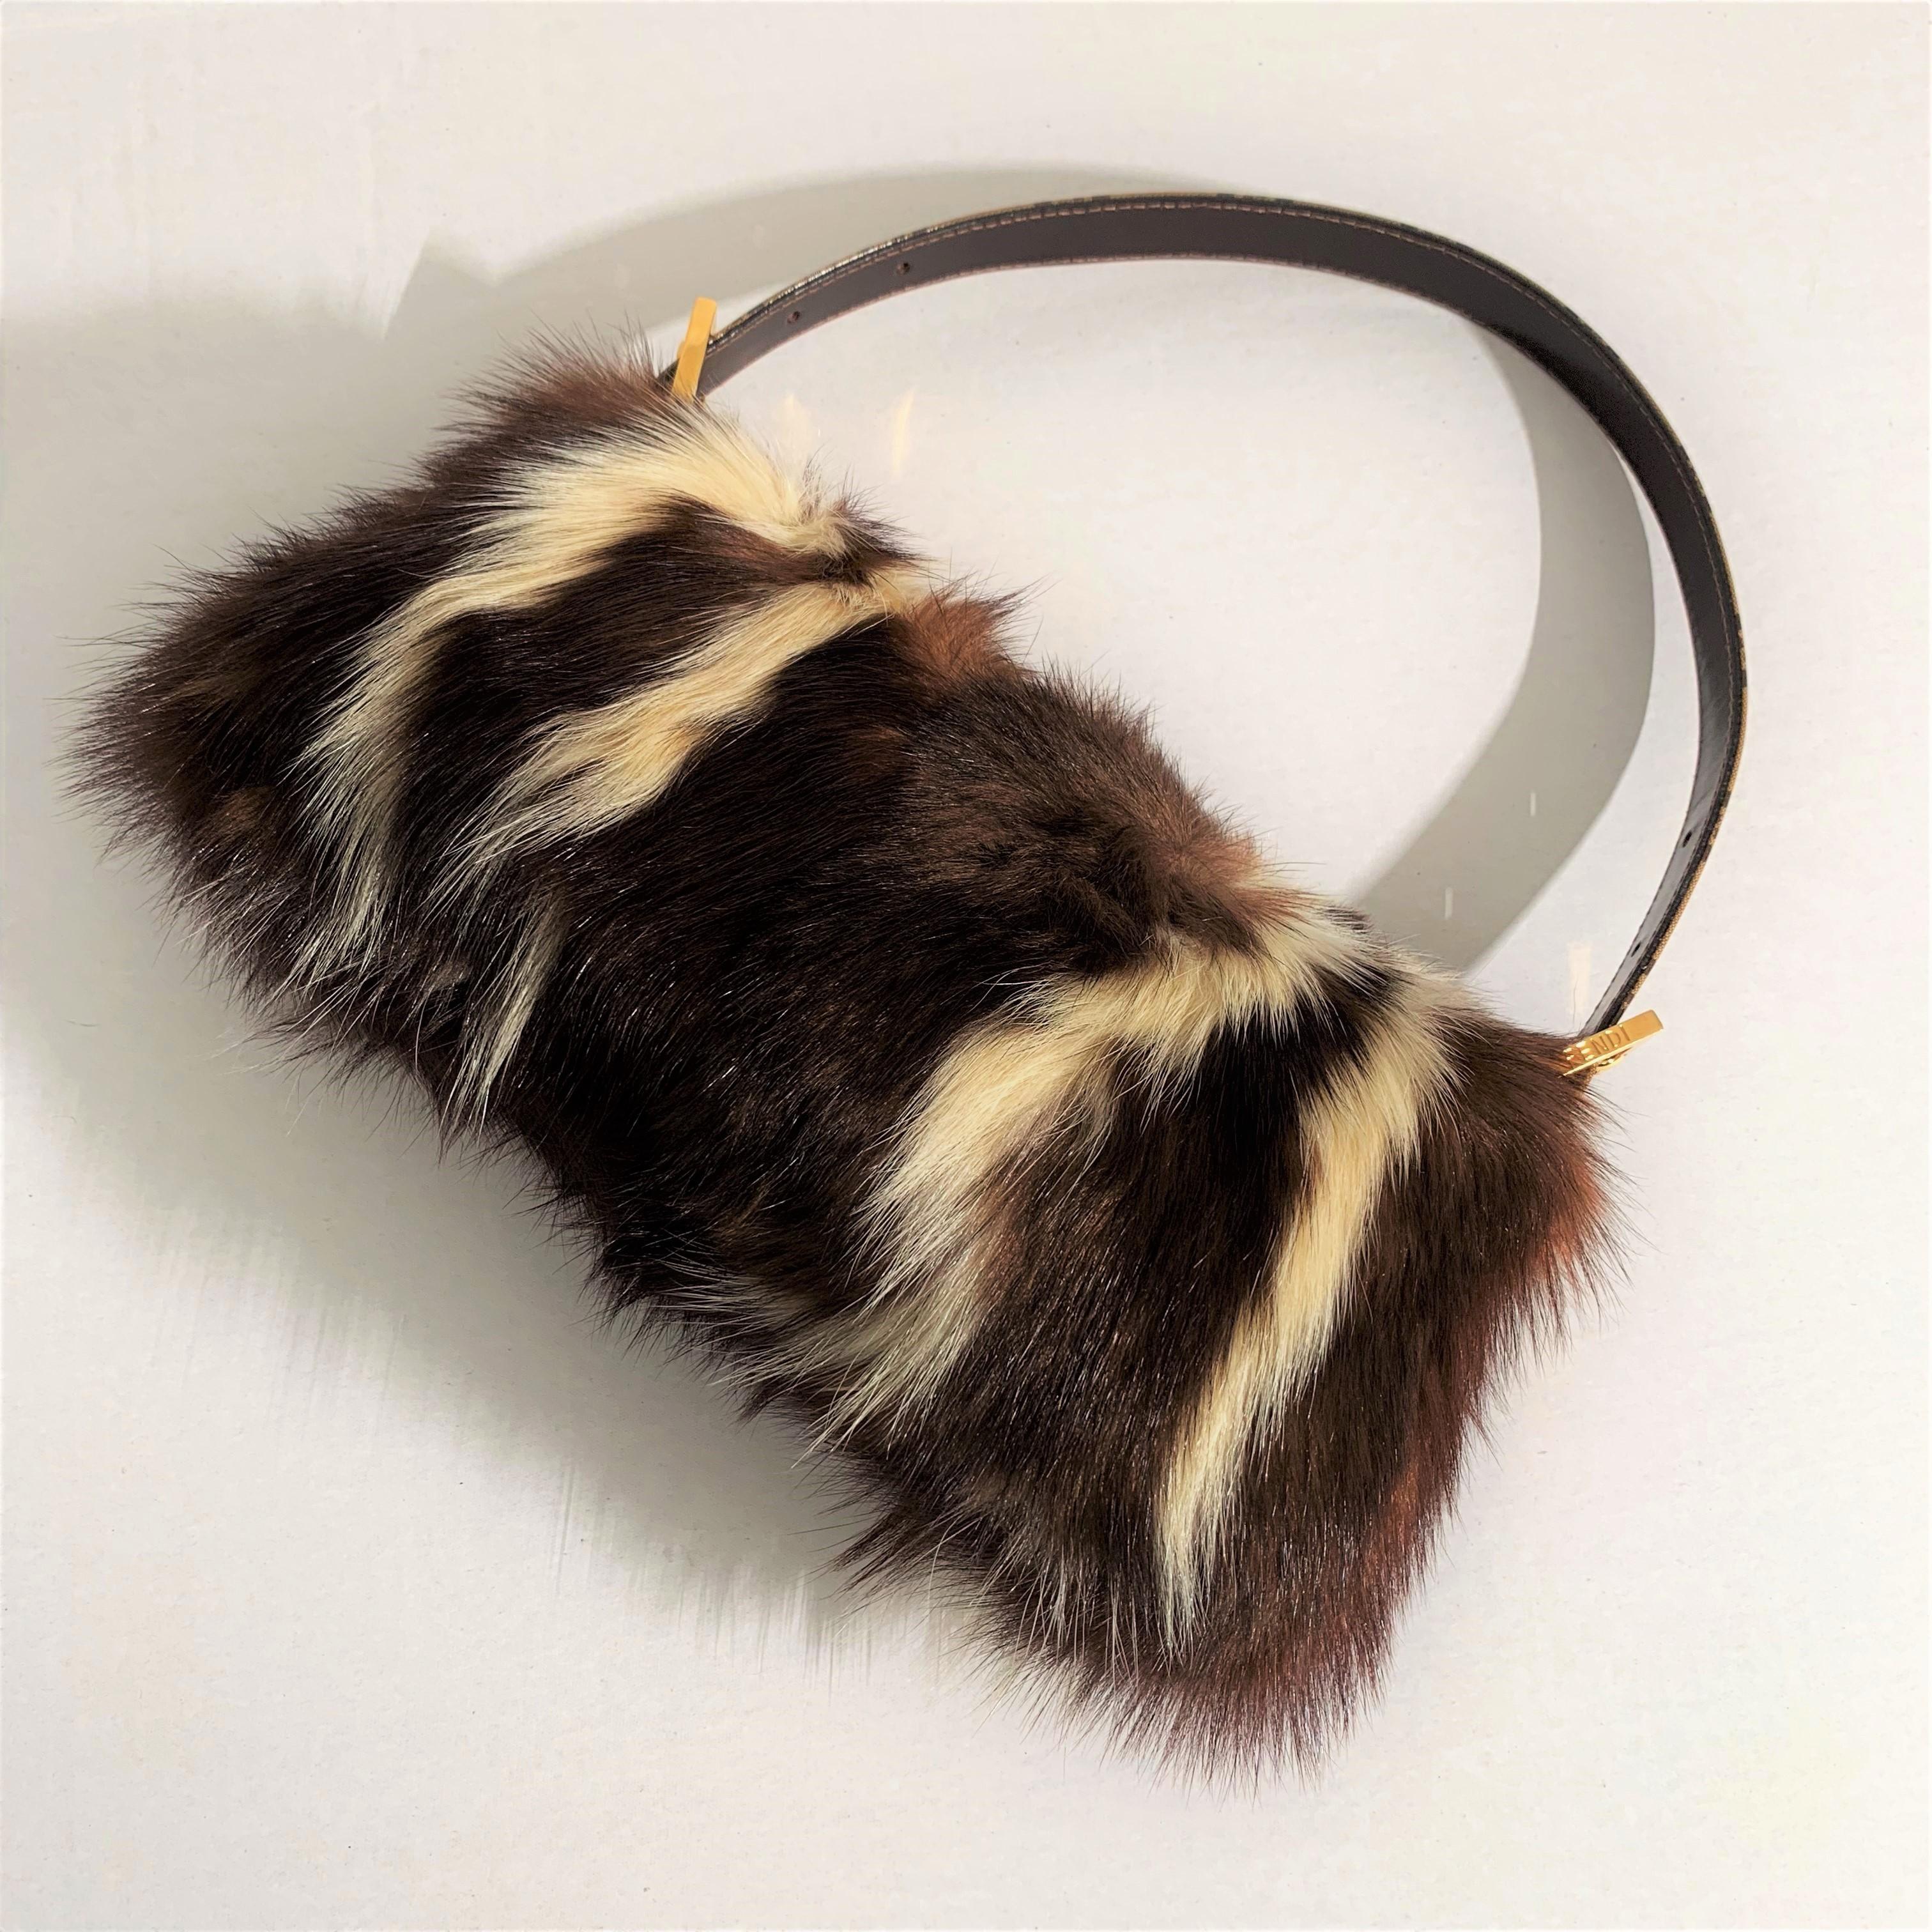 New Rare Fendi Fur Baguette Bag Featured in the 15th Anniversary Book Lt Edition 3